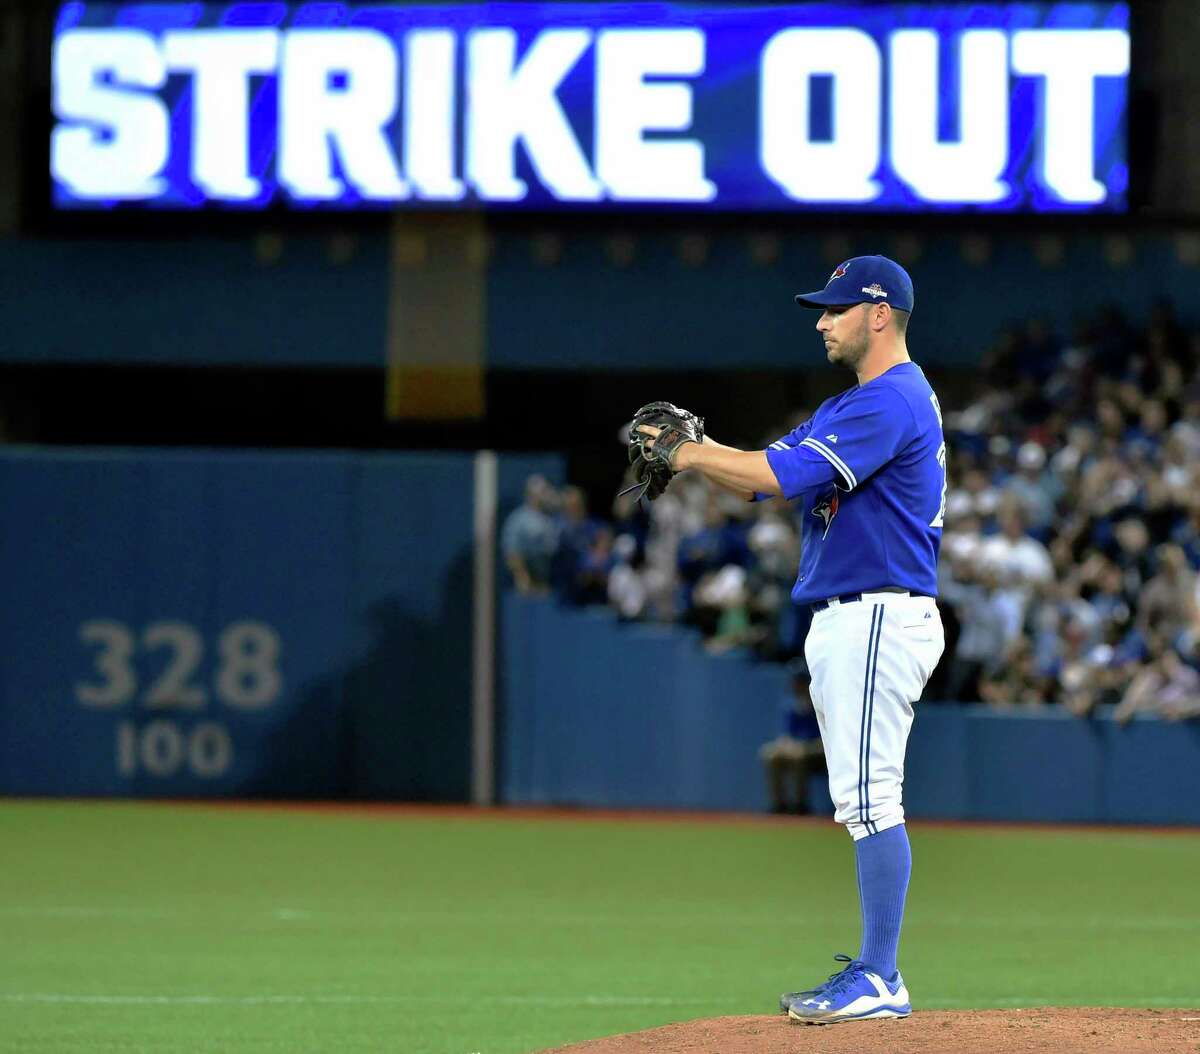 Toronto Blue Jays' starting pitcher Marco Estrada stands on the mound after striking out Kansas City Royals' Kendrys Morales during the eighth inning in Game 5 of baseball's American League Championship Series on Wednesday, Oct. 21, 2015, in Toronto. (Nathan Denette/The Canadian Press via AP) MANDATORY CREDIT